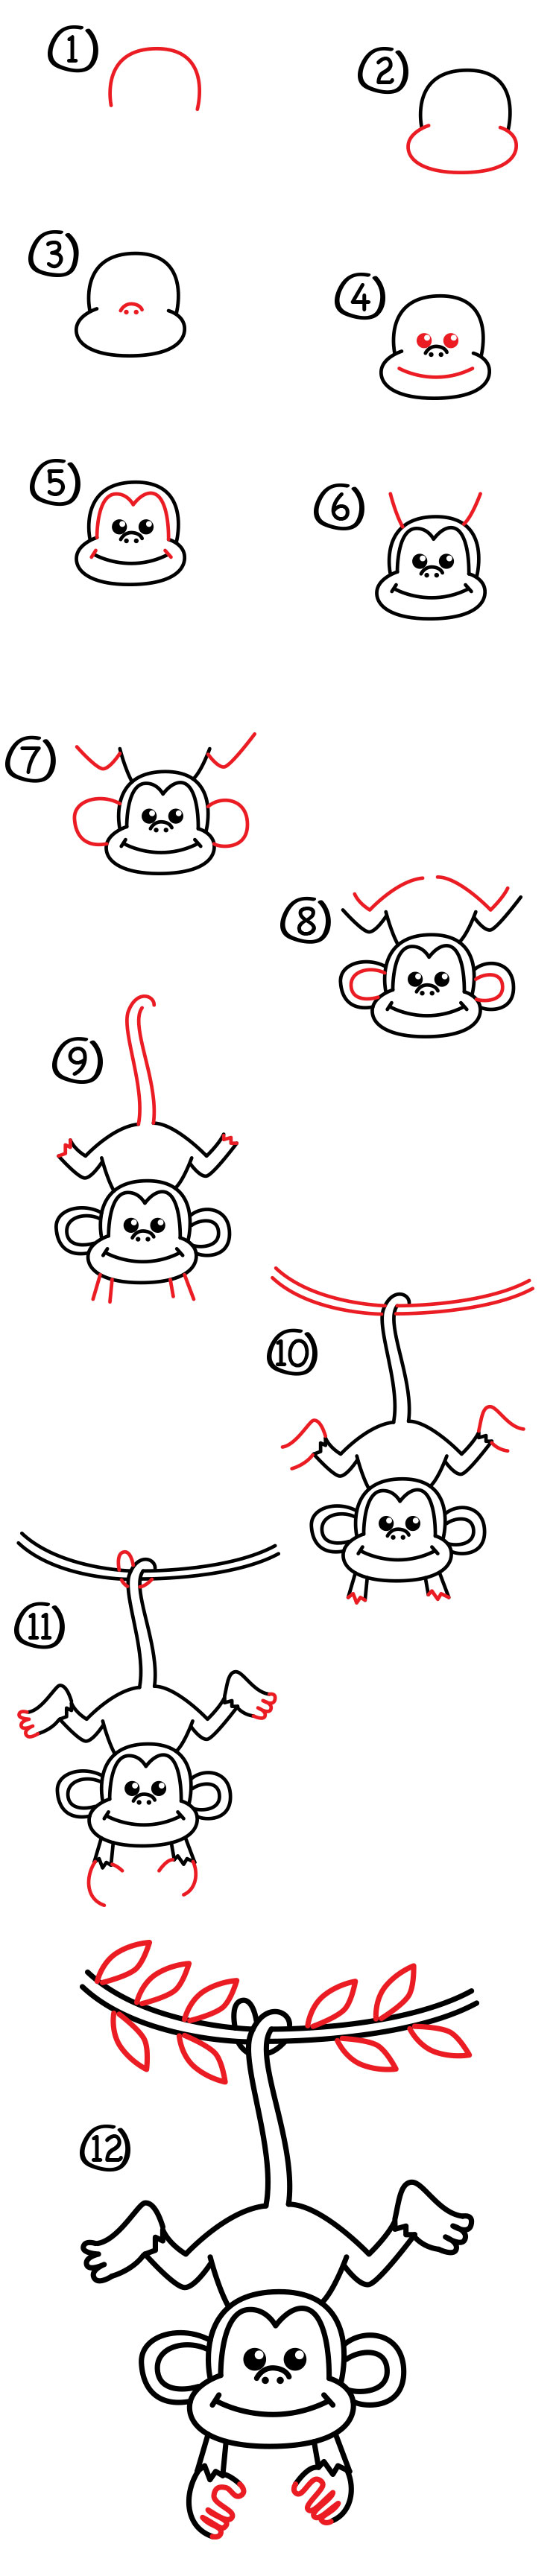 How To Draw A Monkey - Art For Kids Hub